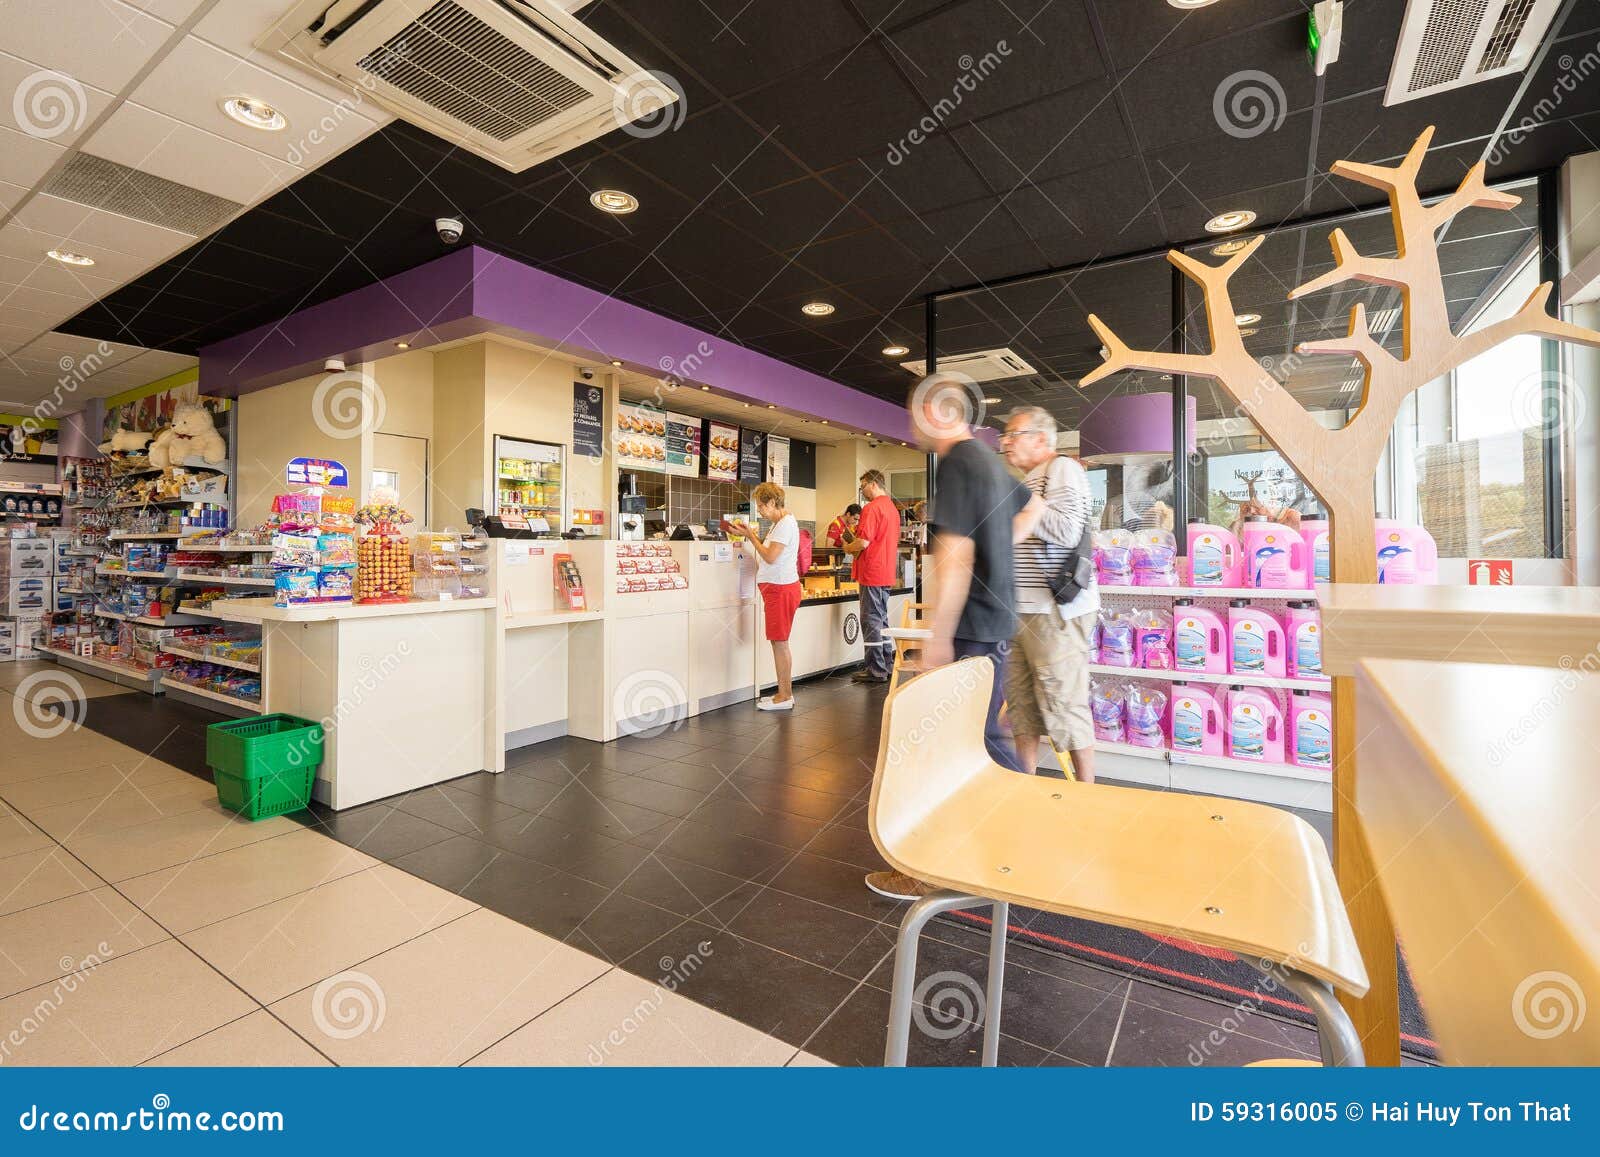 Gas station store interior editorial image. Image of goods - 59316005